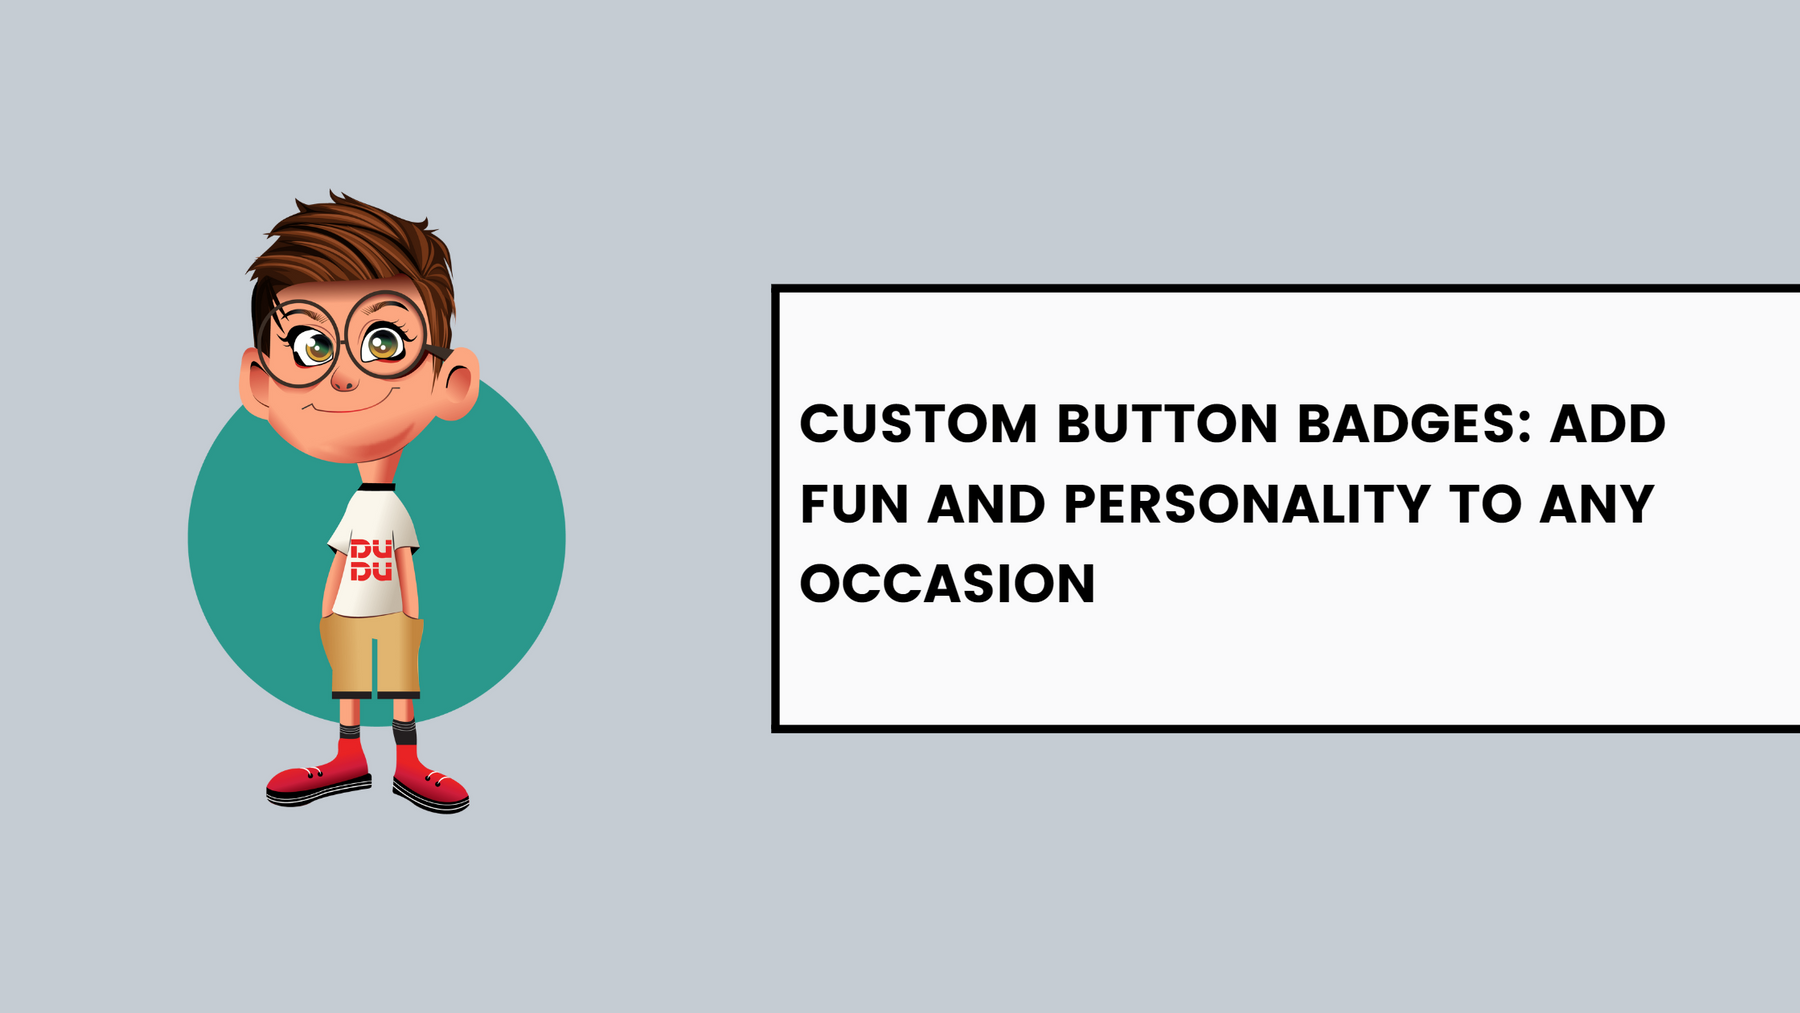 Custom Button Badges: Add Fun and Personality to Any Occasion